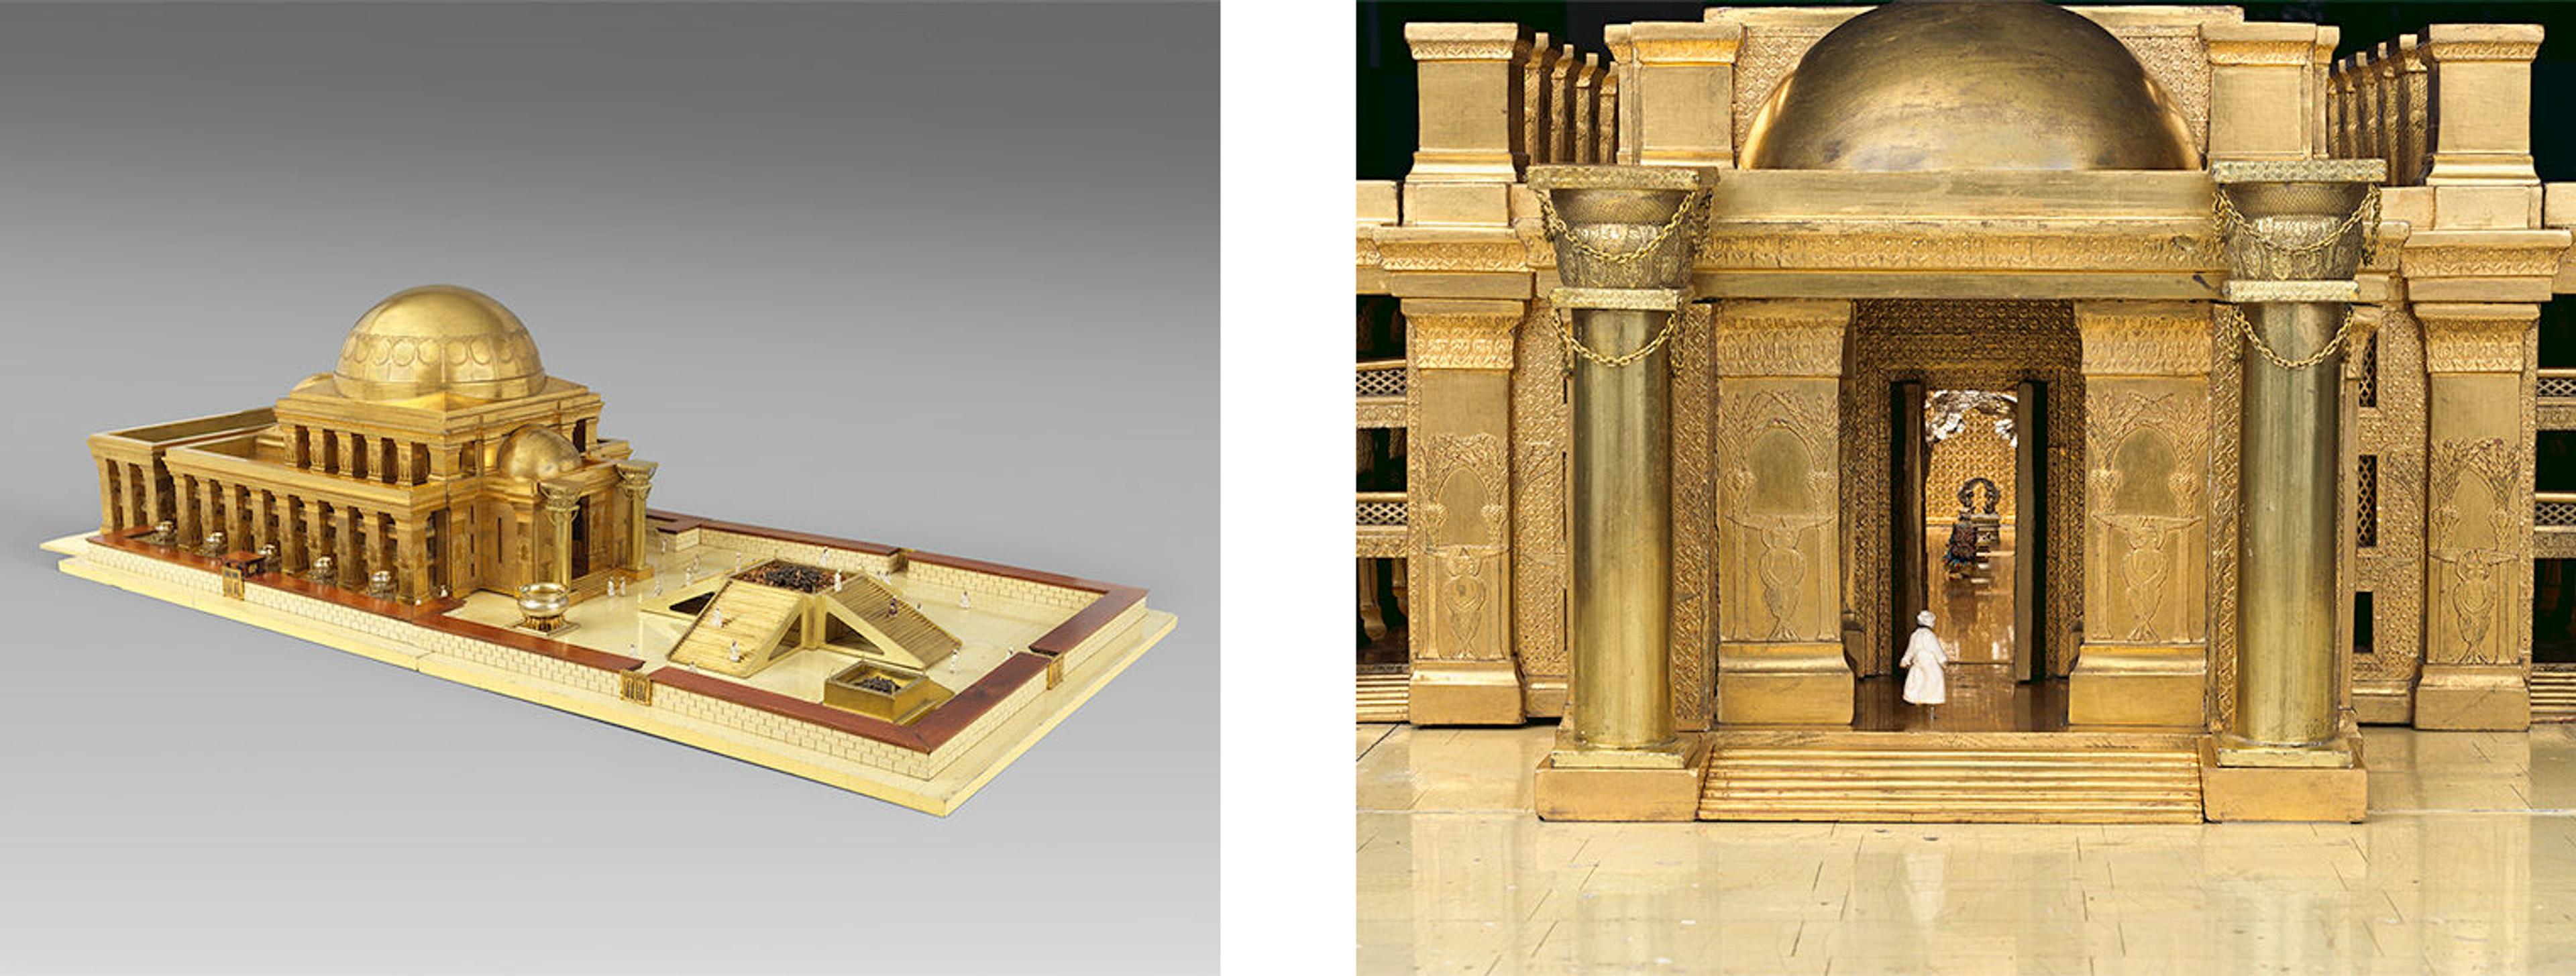 Left: Wide shot of architectural model of the temple of King Solomon in Jerusalem; Right: detail of tiny white-robed priest figurine entering the Temple.